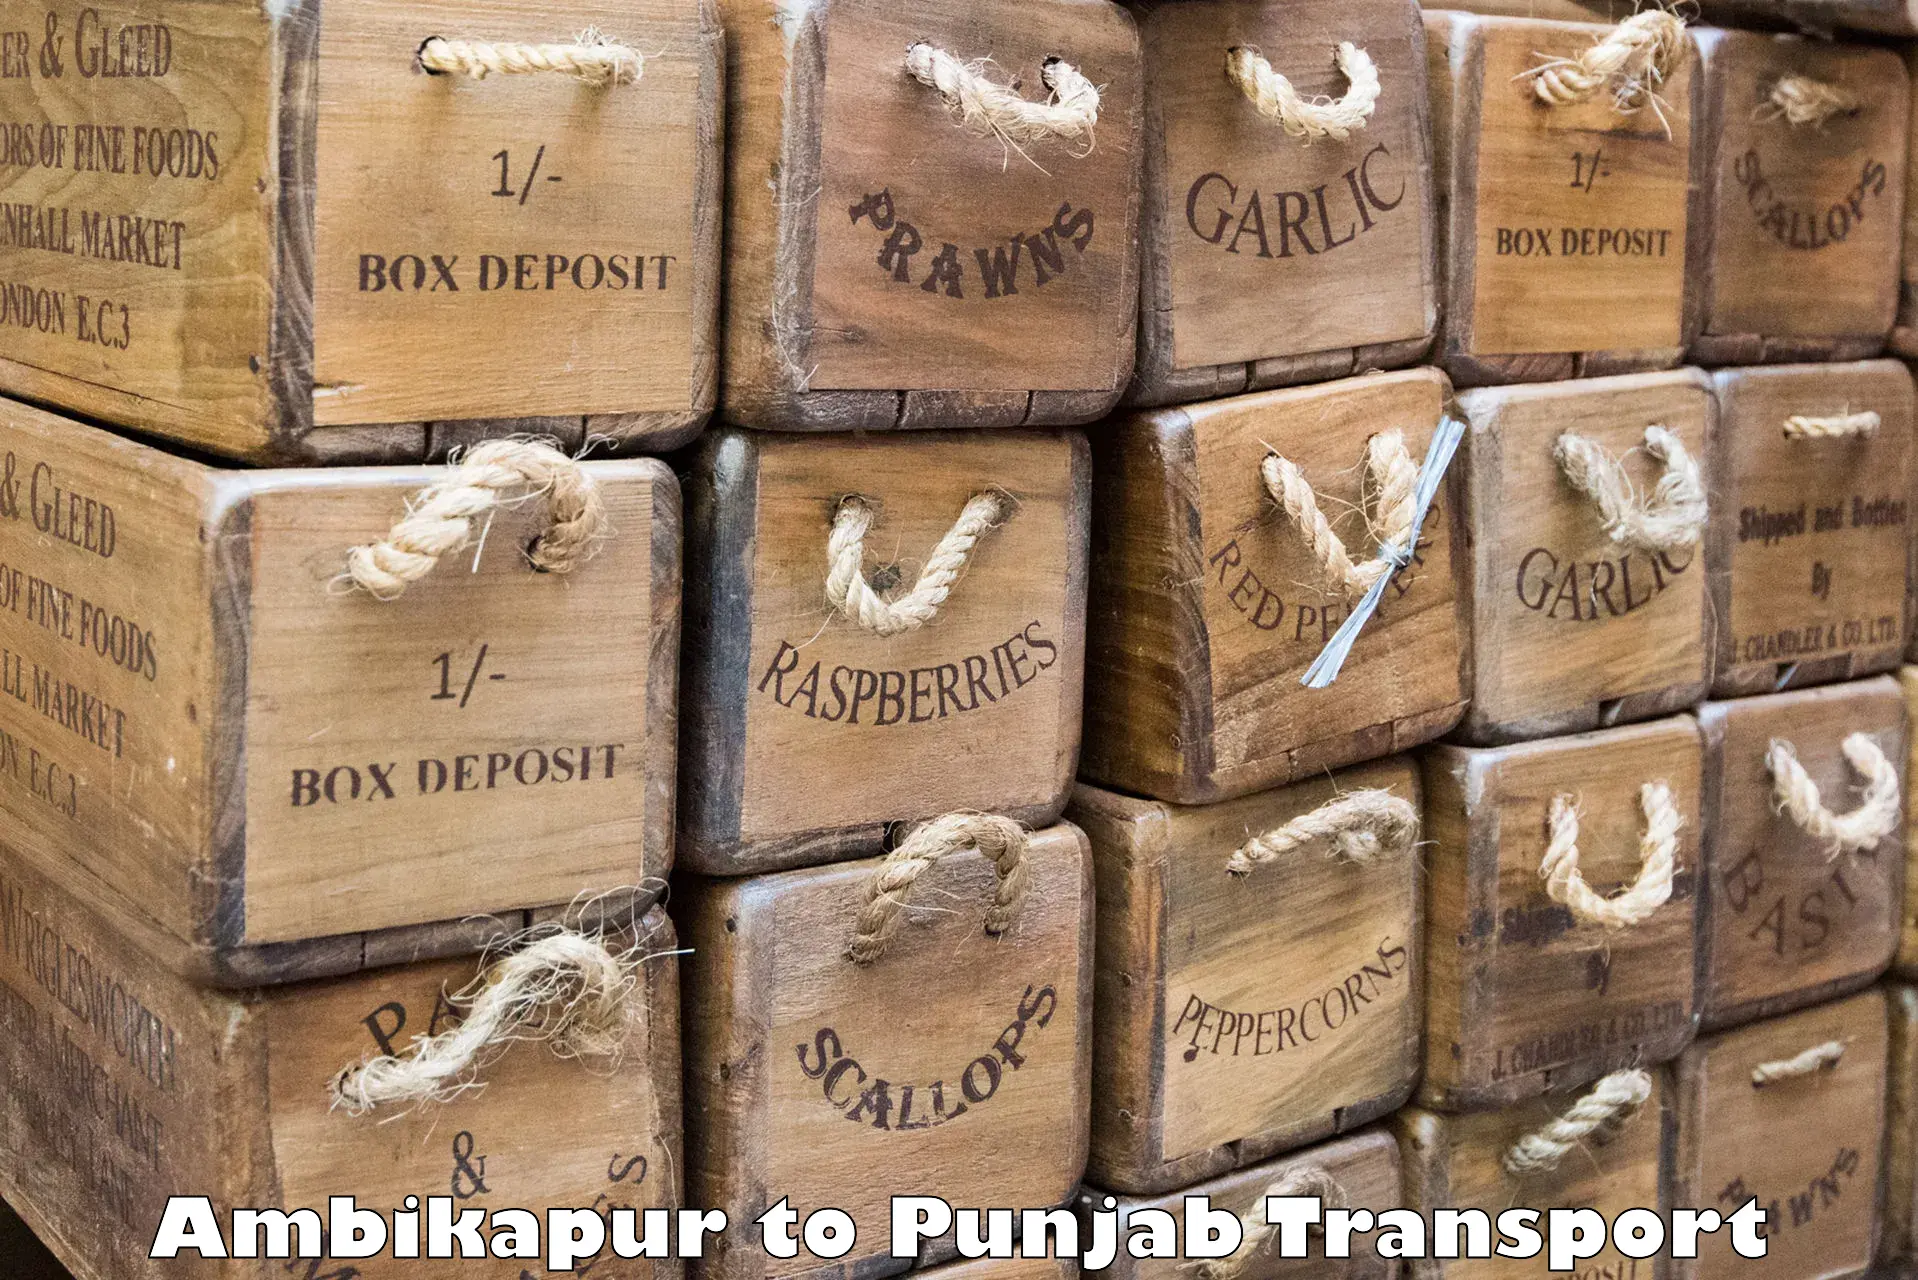 Shipping services Ambikapur to Mohali